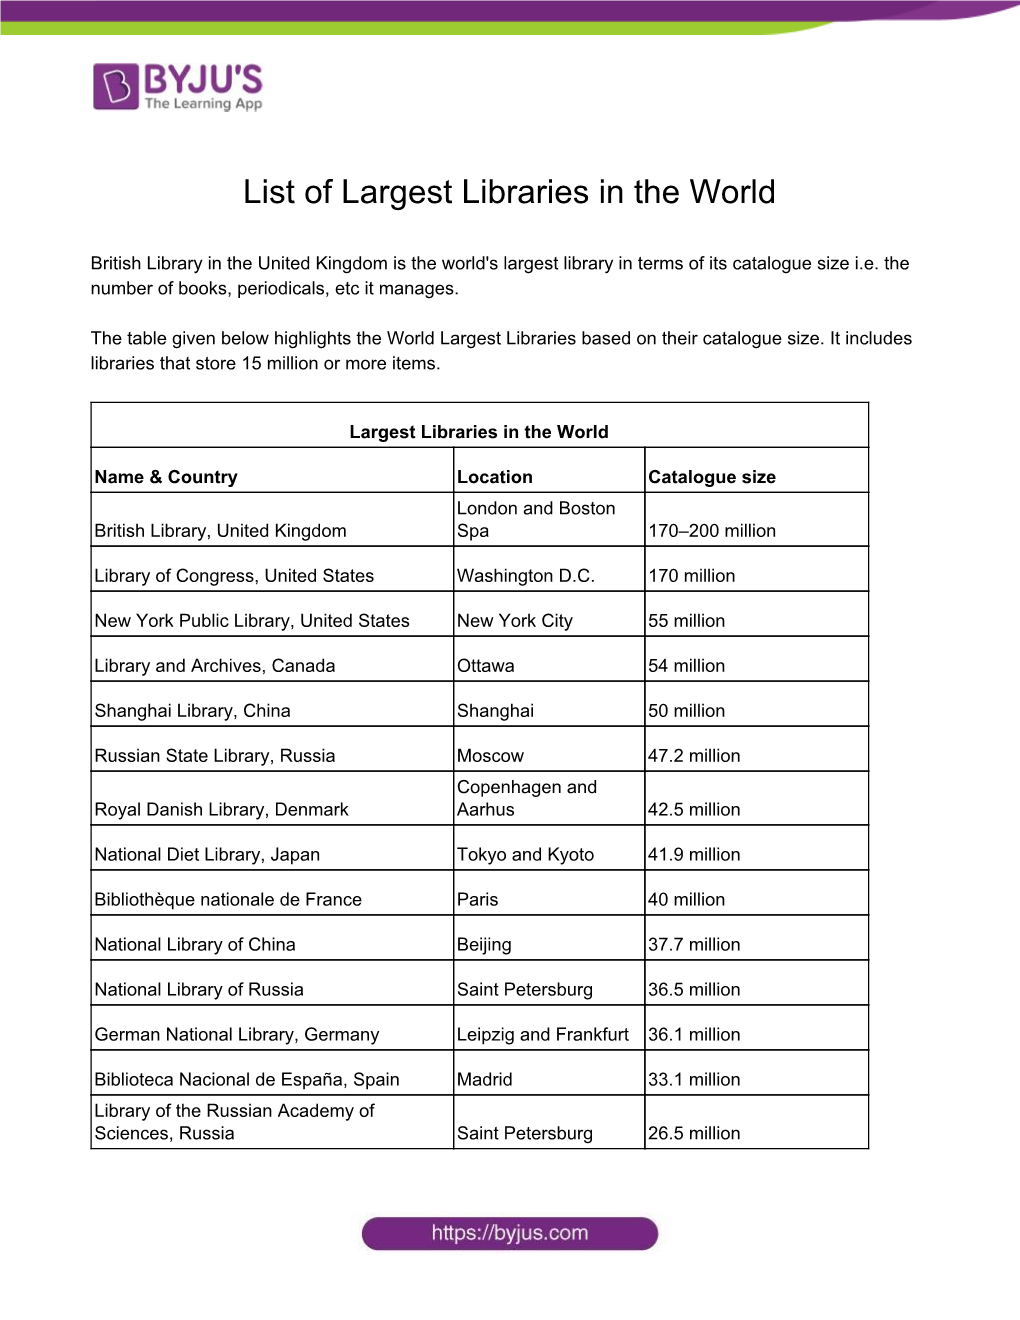 List of Largest Libraries in the World